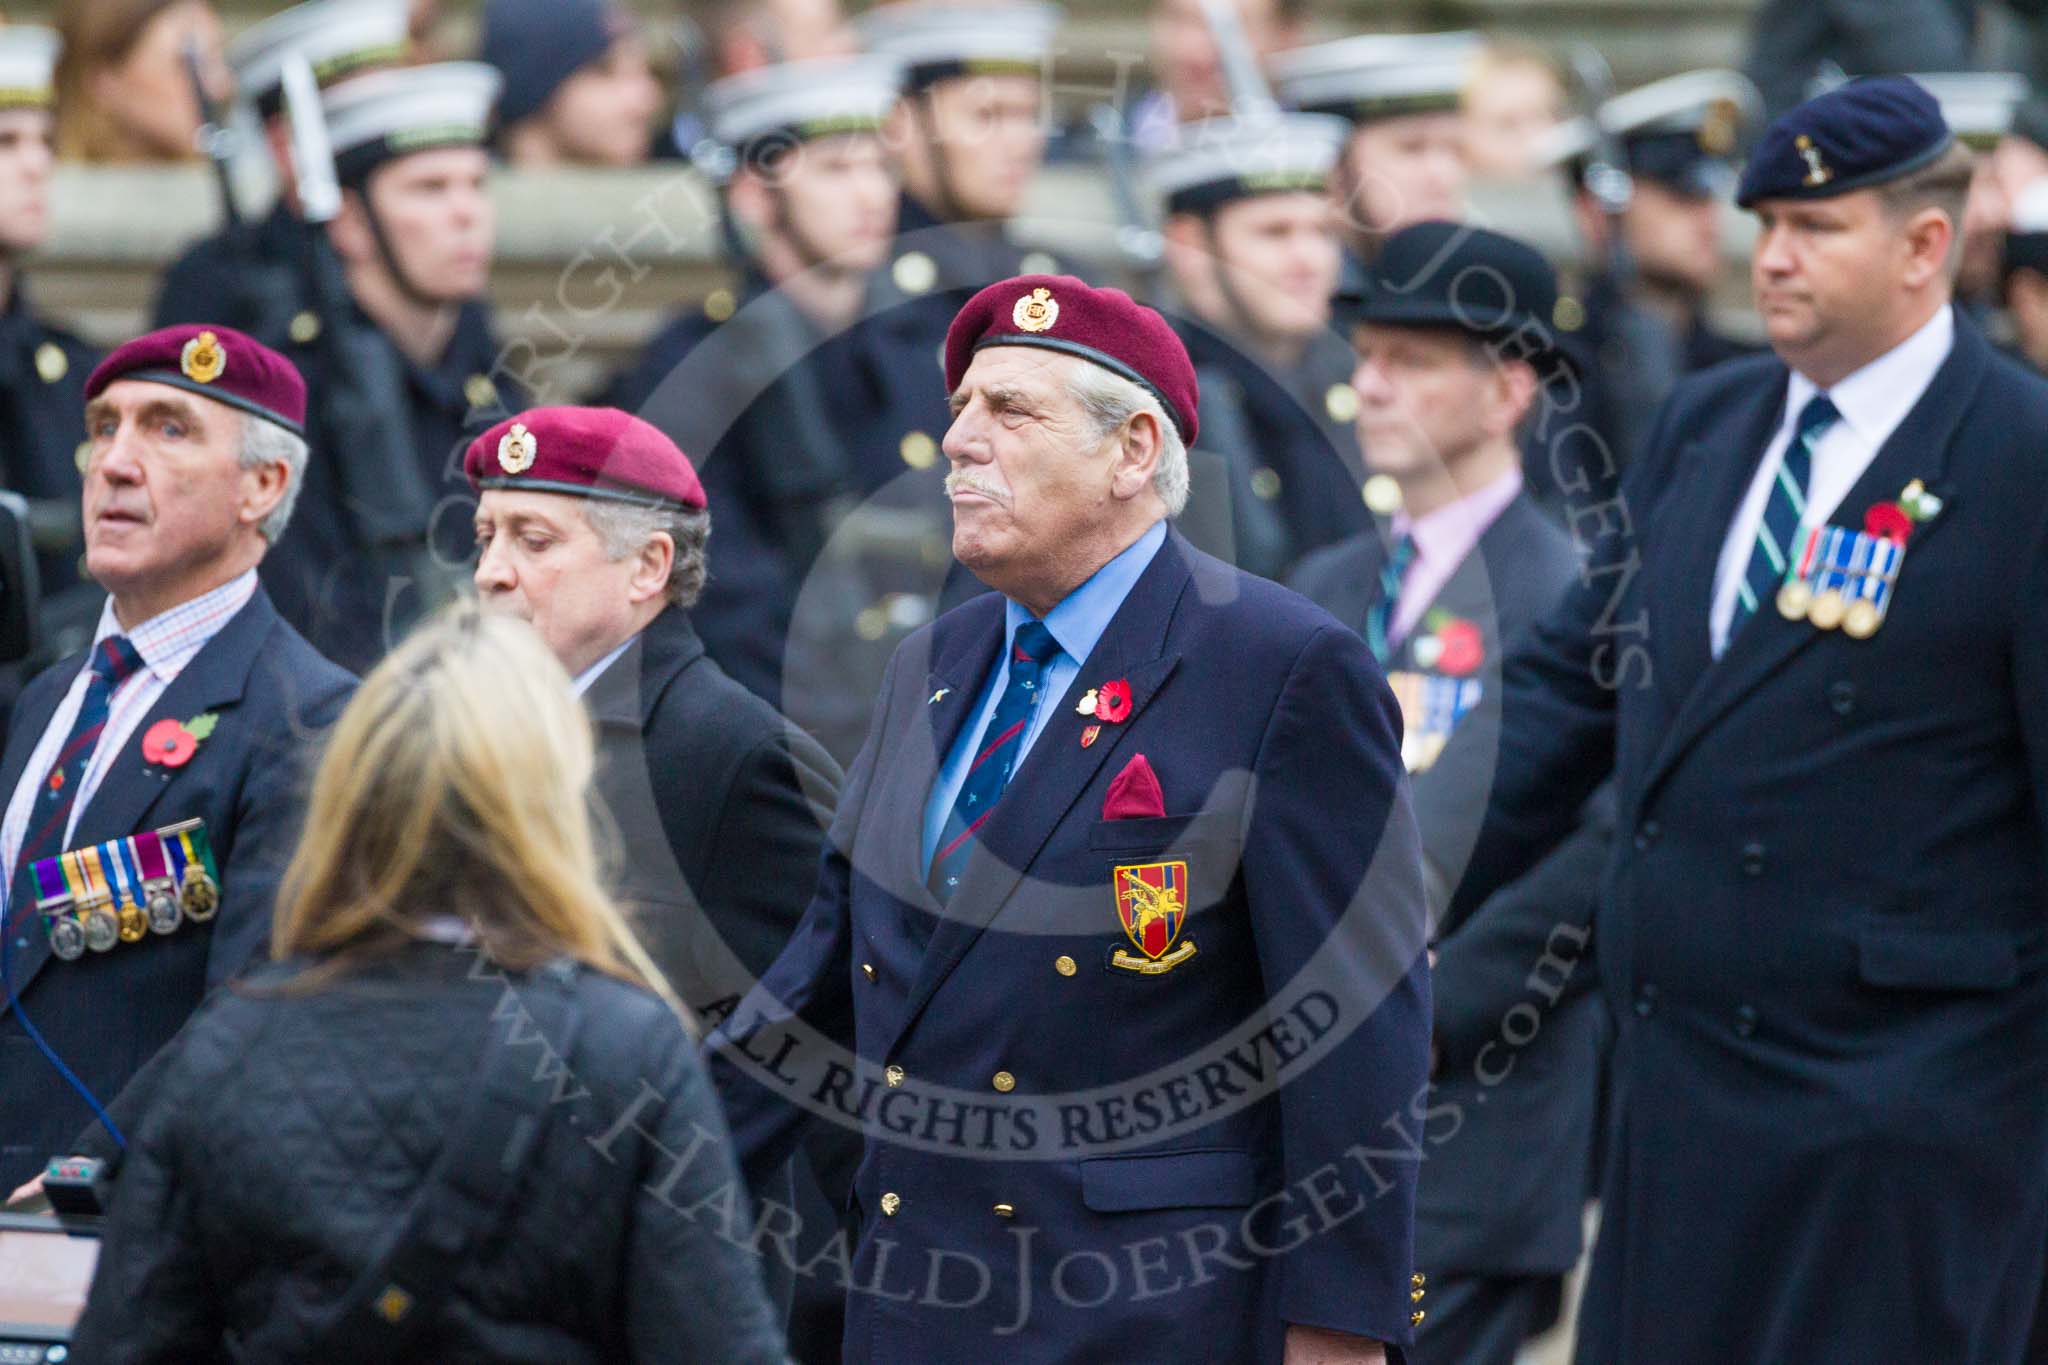 Remembrance Sunday at the Cenotaph 2015: Group B7, Airborne Engineers Association.
Cenotaph, Whitehall, London SW1,
London,
Greater London,
United Kingdom,
on 08 November 2015 at 11:37, image #59